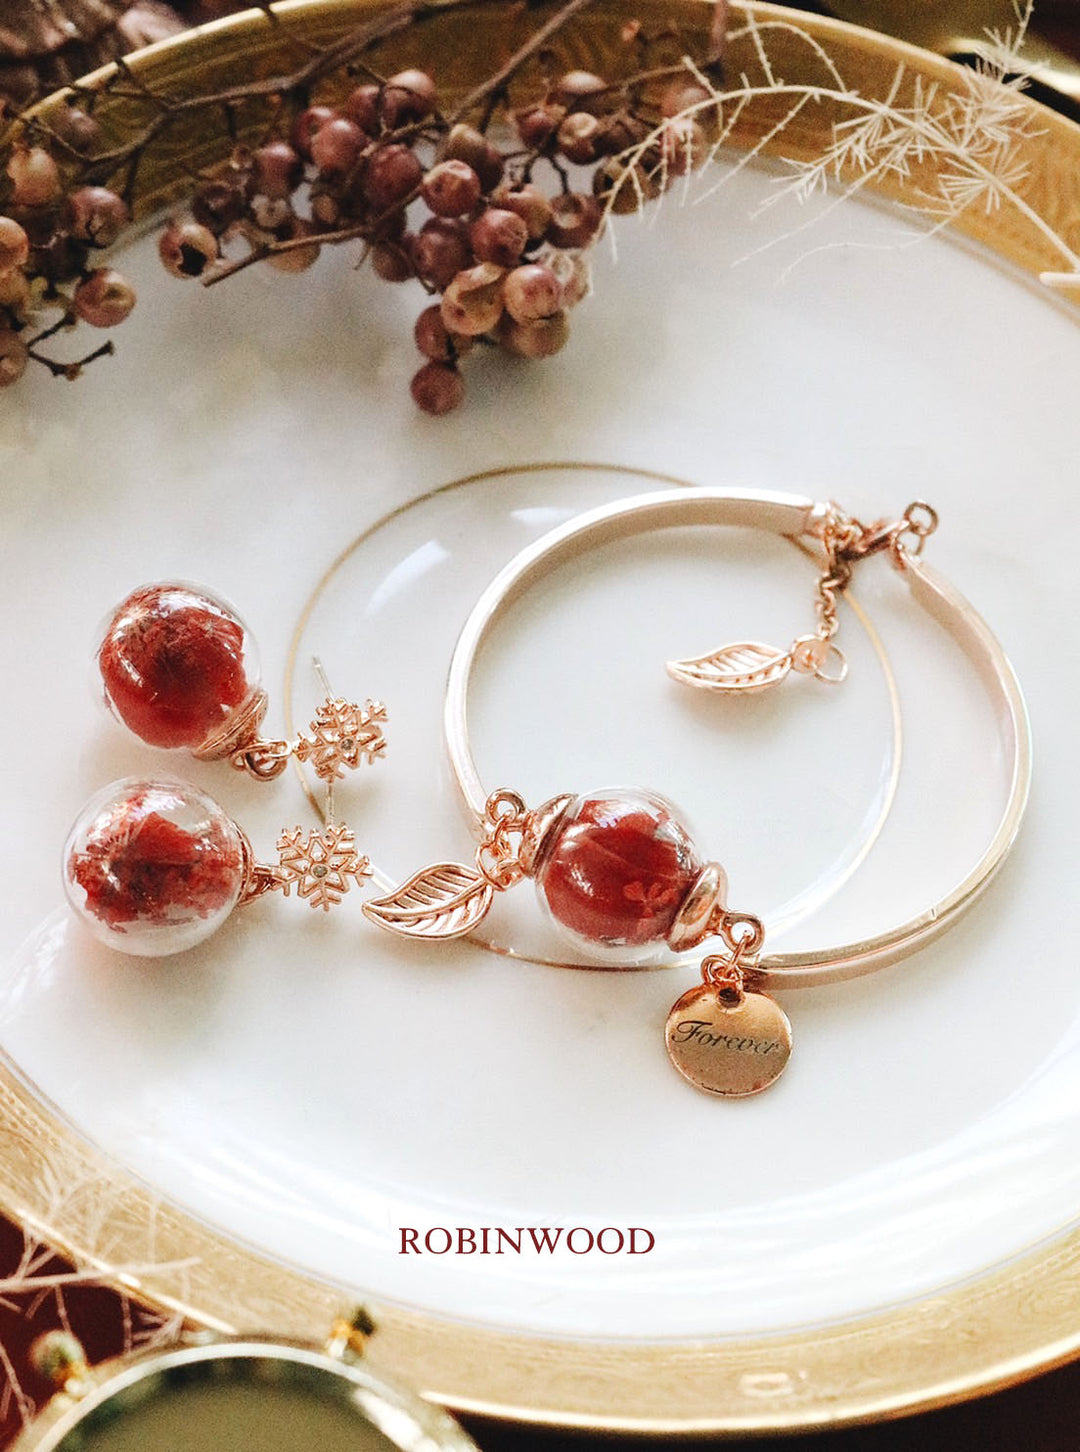 English Rose Collection's " Snow Flake & Eternal Love Set ", Christmas & Valentine Limited Series, Robinwood